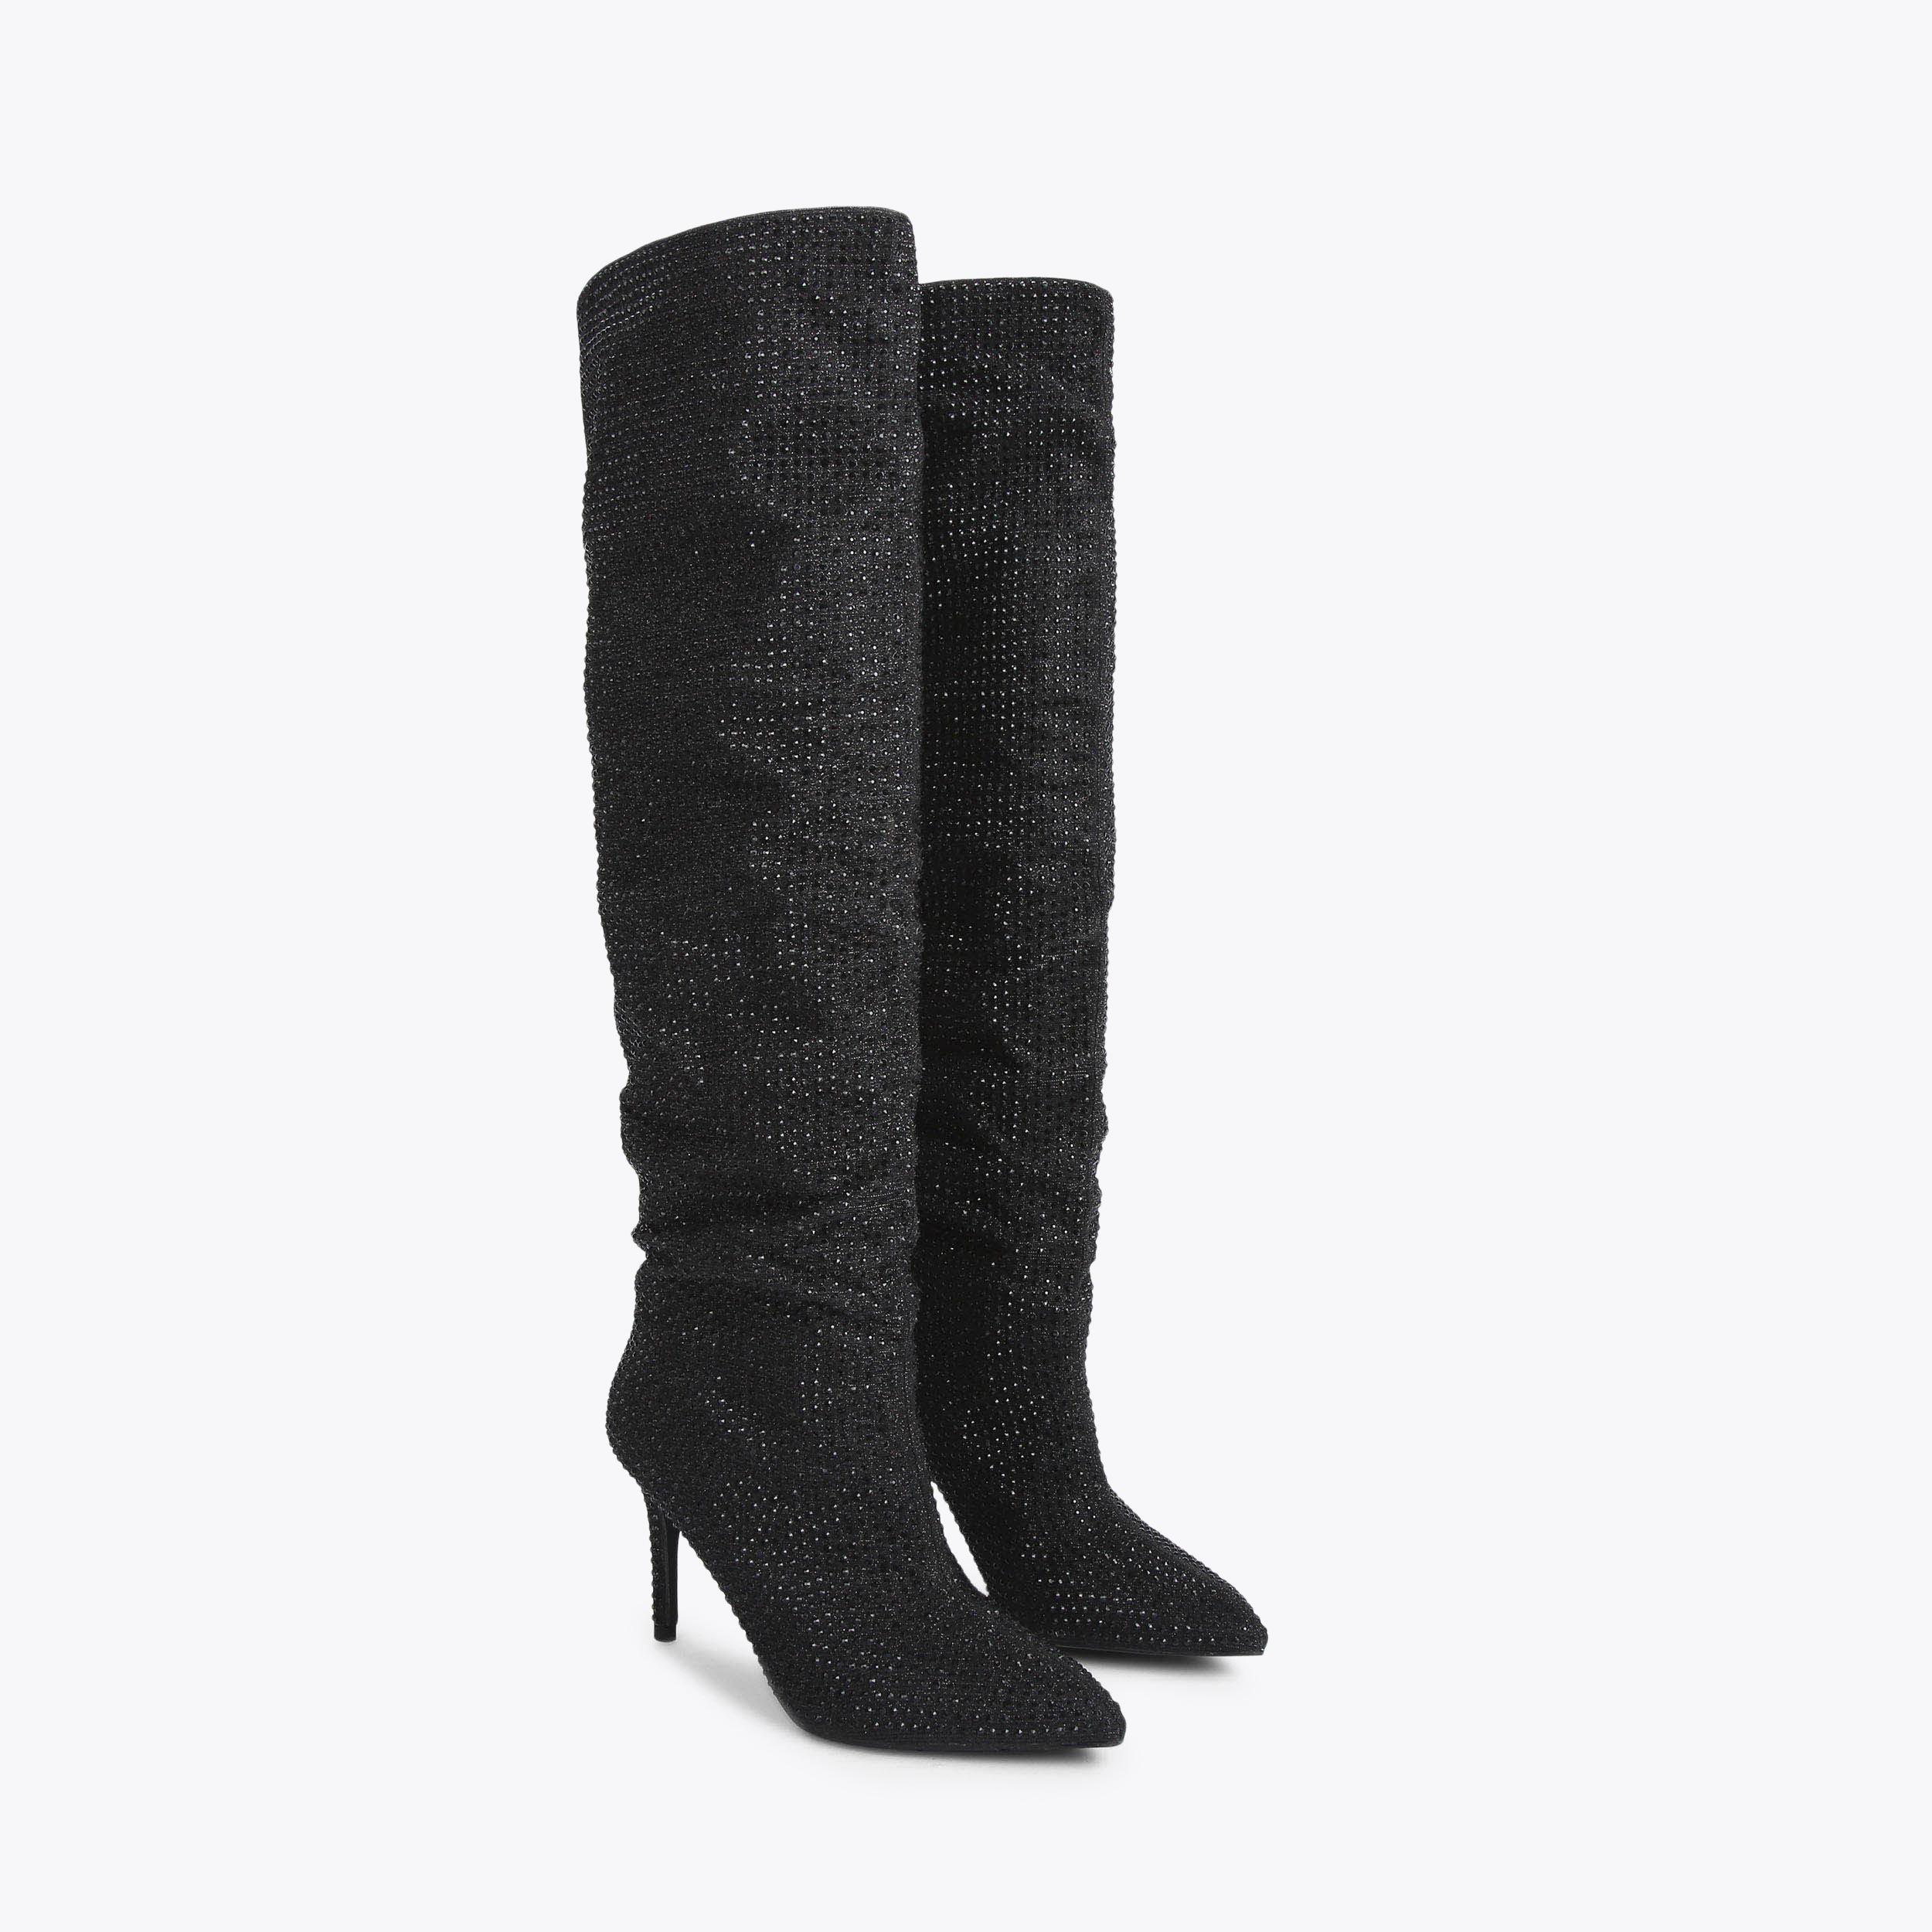 STAND OUT Black Jewelled High Leg Boots by CARVELA